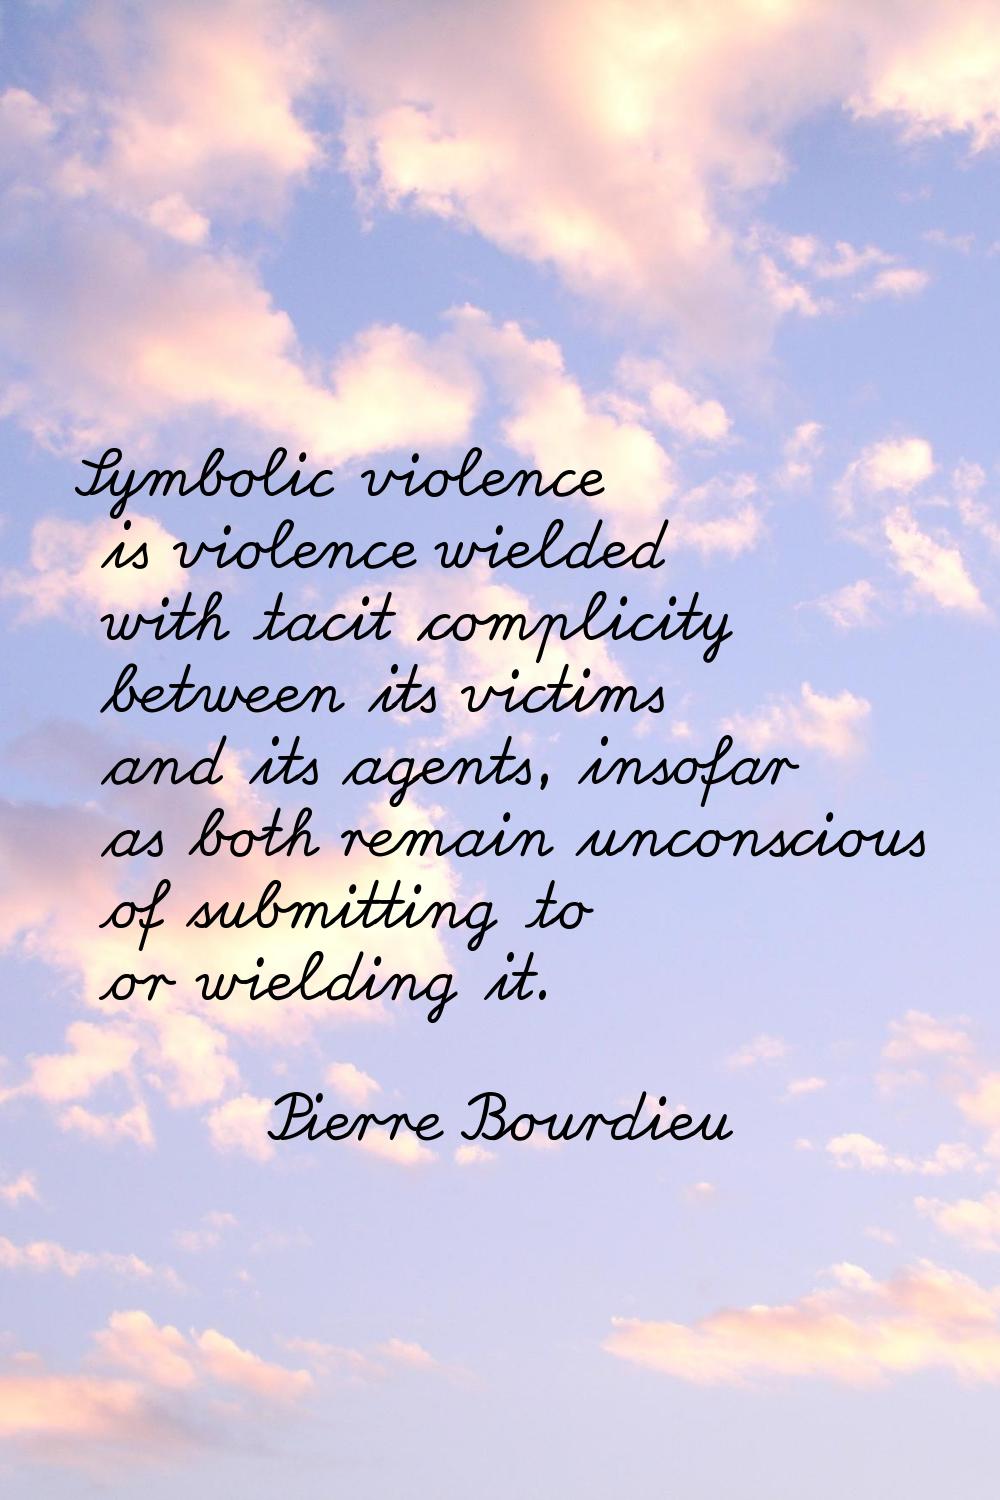 Symbolic violence is violence wielded with tacit complicity between its victims and its agents, ins